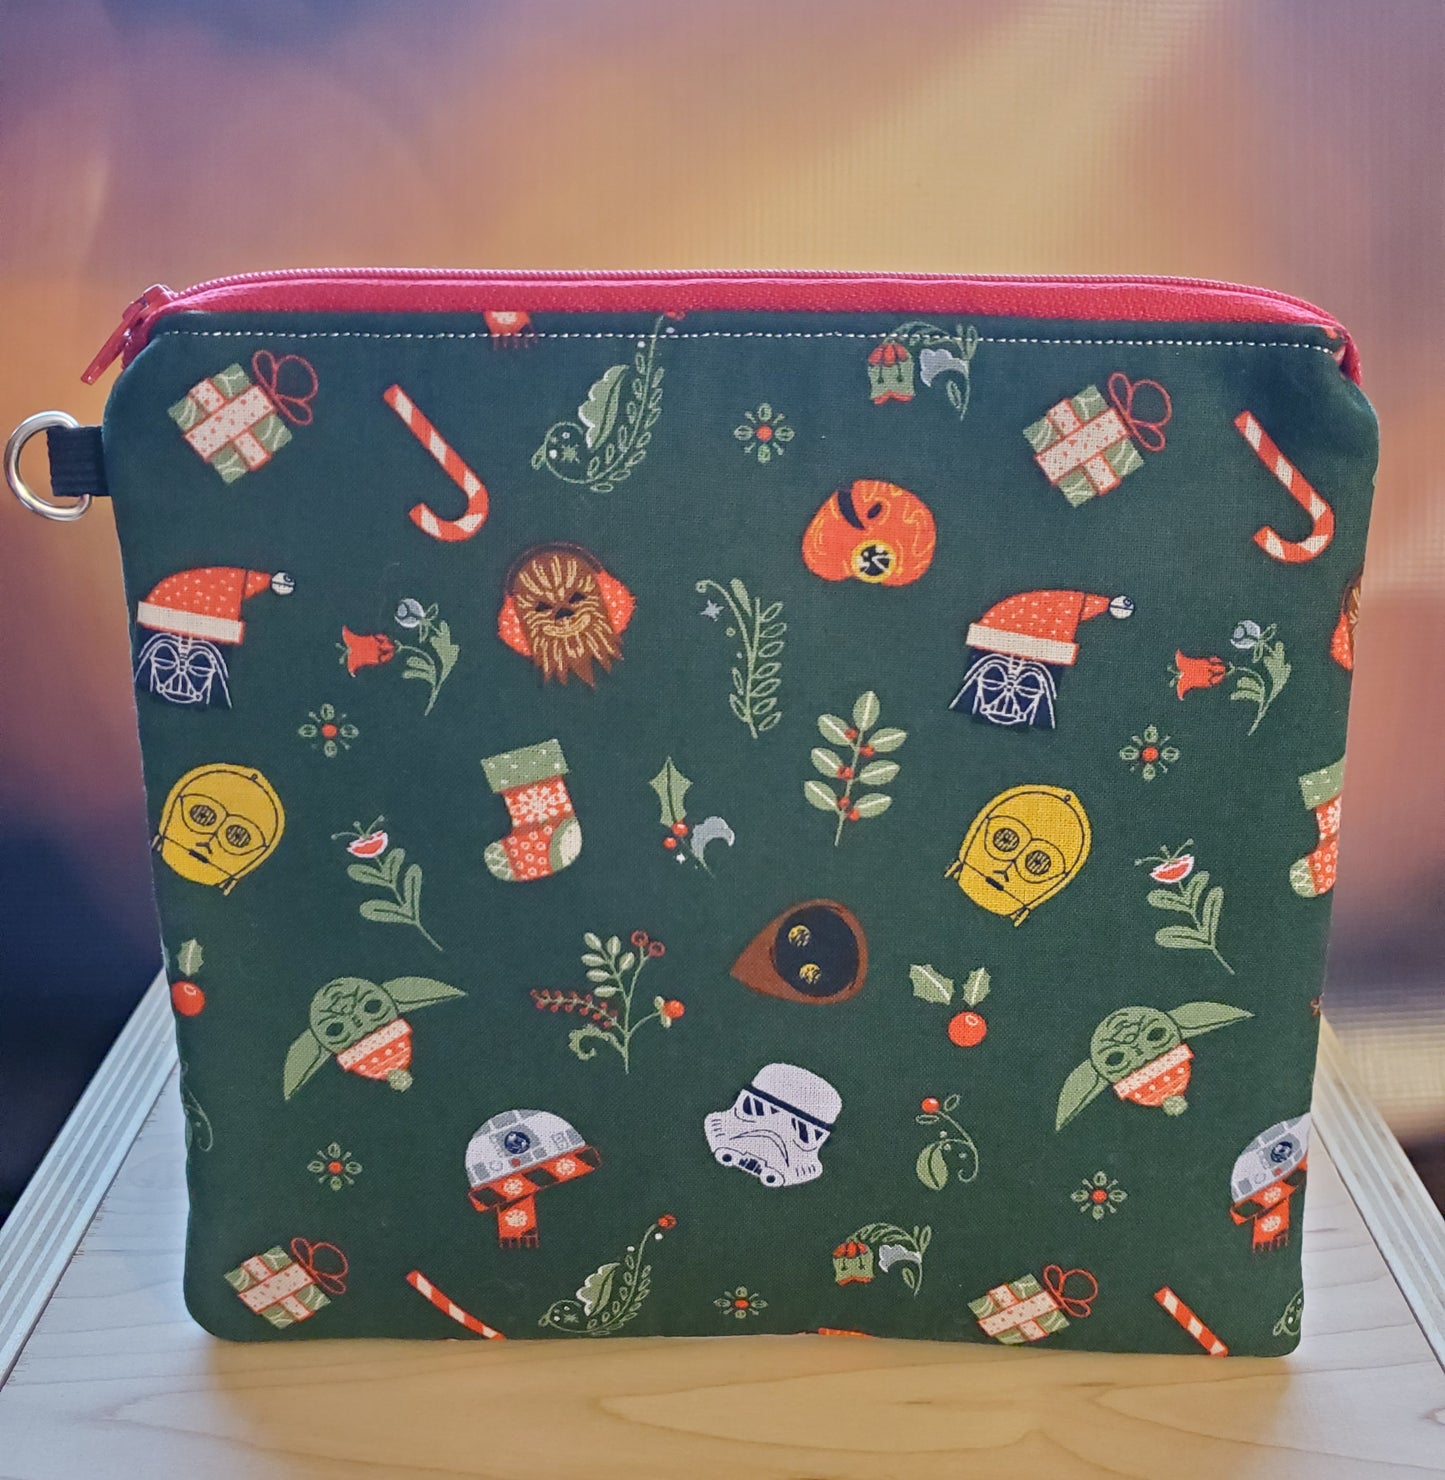 Galactic Wars Christmas Characters Zipper Bag - perfect for pencils, snacks and more!